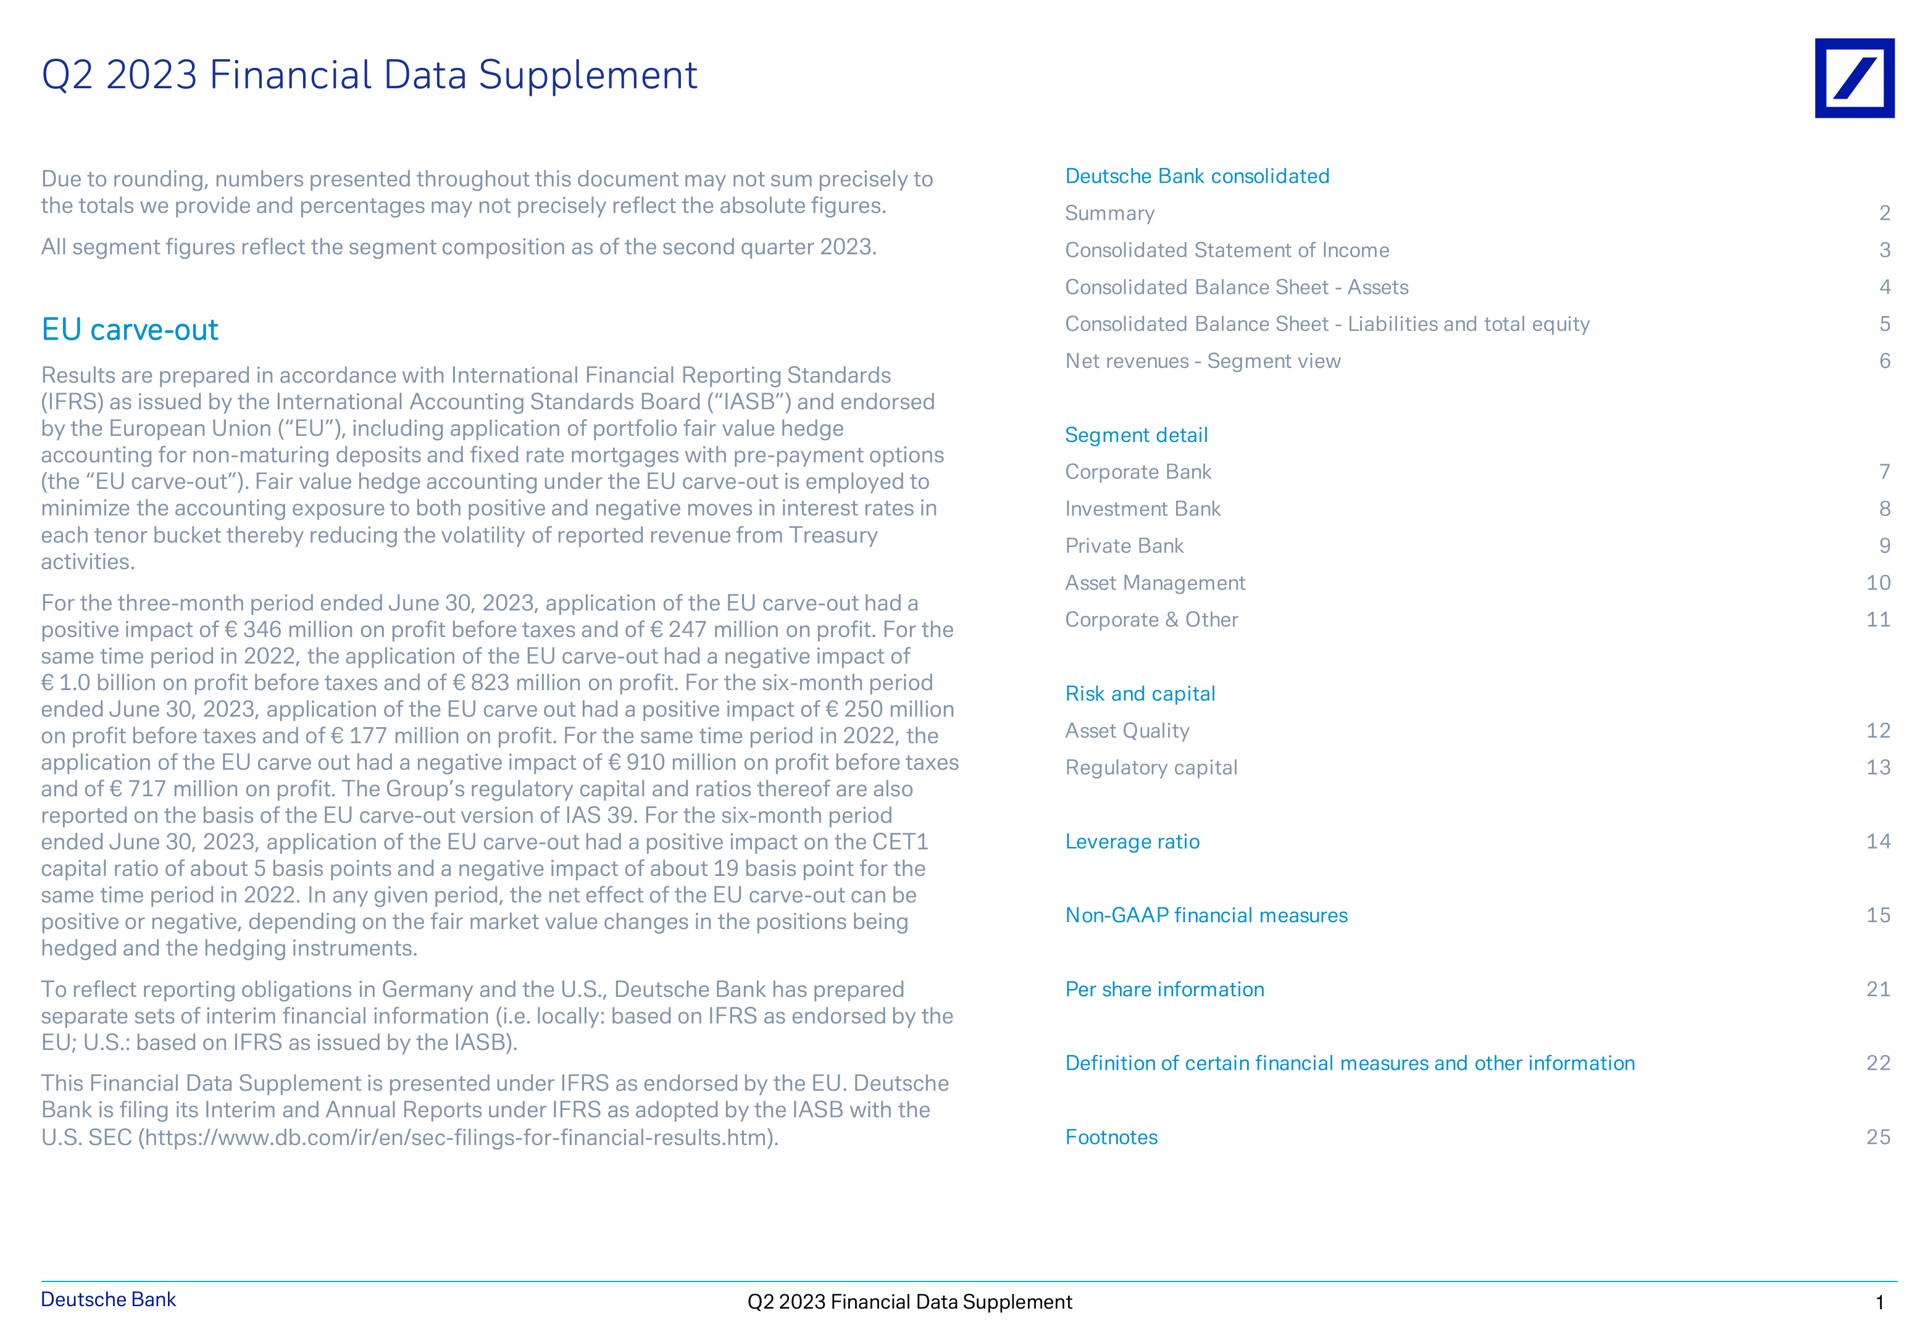 financial data supplement carve out due to rounding numbers presented throughout this document may not sum precisely to the totals we provide and percentages may not precisely reflect the absolute figures all segment figures reflect the segment composition as of the second quarter results are prepared in accordance with international reporting standards as issued by the international accounting standards board and endorsed by the union including application of portfolio fair value hedge accounting for non maturing deposits and fixed rate mortgages with payment options the fair value hedge accounting under the is employed to minimize the accounting exposure to both positive and negative moves in interest rates in each tenor bucket thereby reducing the volatility of reported revenue from treasury activities for the three month period ended june application of the had a positive impact of million on profit before taxes and of million on profit for the same time period in the application of the had a negative impact of billion on profit before taxes and of million on profit for the six month period ended june application of the carve out had a positive impact of million on profit before taxes and of million on profit for the same time period in the application of the carve out had a negative impact of million on profit before taxes and of million on profit the group regulatory capital and ratios thereof are also reported on the basis of the version of for the six month period ended june application of the had a positive impact on the capital ratio of about basis points and a negative impact of about basis point for the same time period in in any given period the net effect of the can be positive or negative depending on the fair market value changes in the positions being hedged and the hedging instruments to reflect reporting obligations in and the bank has prepared separate sets of interim information i locally based on as endorsed by the based on as issued by the this is presented under as endorsed by the bank is filing its interim and annual reports under as adopted by the with the sec bank consolidated summary consolidated statement of income consolidated balance sheet assets consolidated balance sheet liabilities and total equity net revenues segment view segment detail corporate bank investment bank private bank asset management corporate other risk and capital asset quality regulatory capital leverage ratio non measures per share information definition of certain measures and other information footnotes bank a at | Deutsche Bank